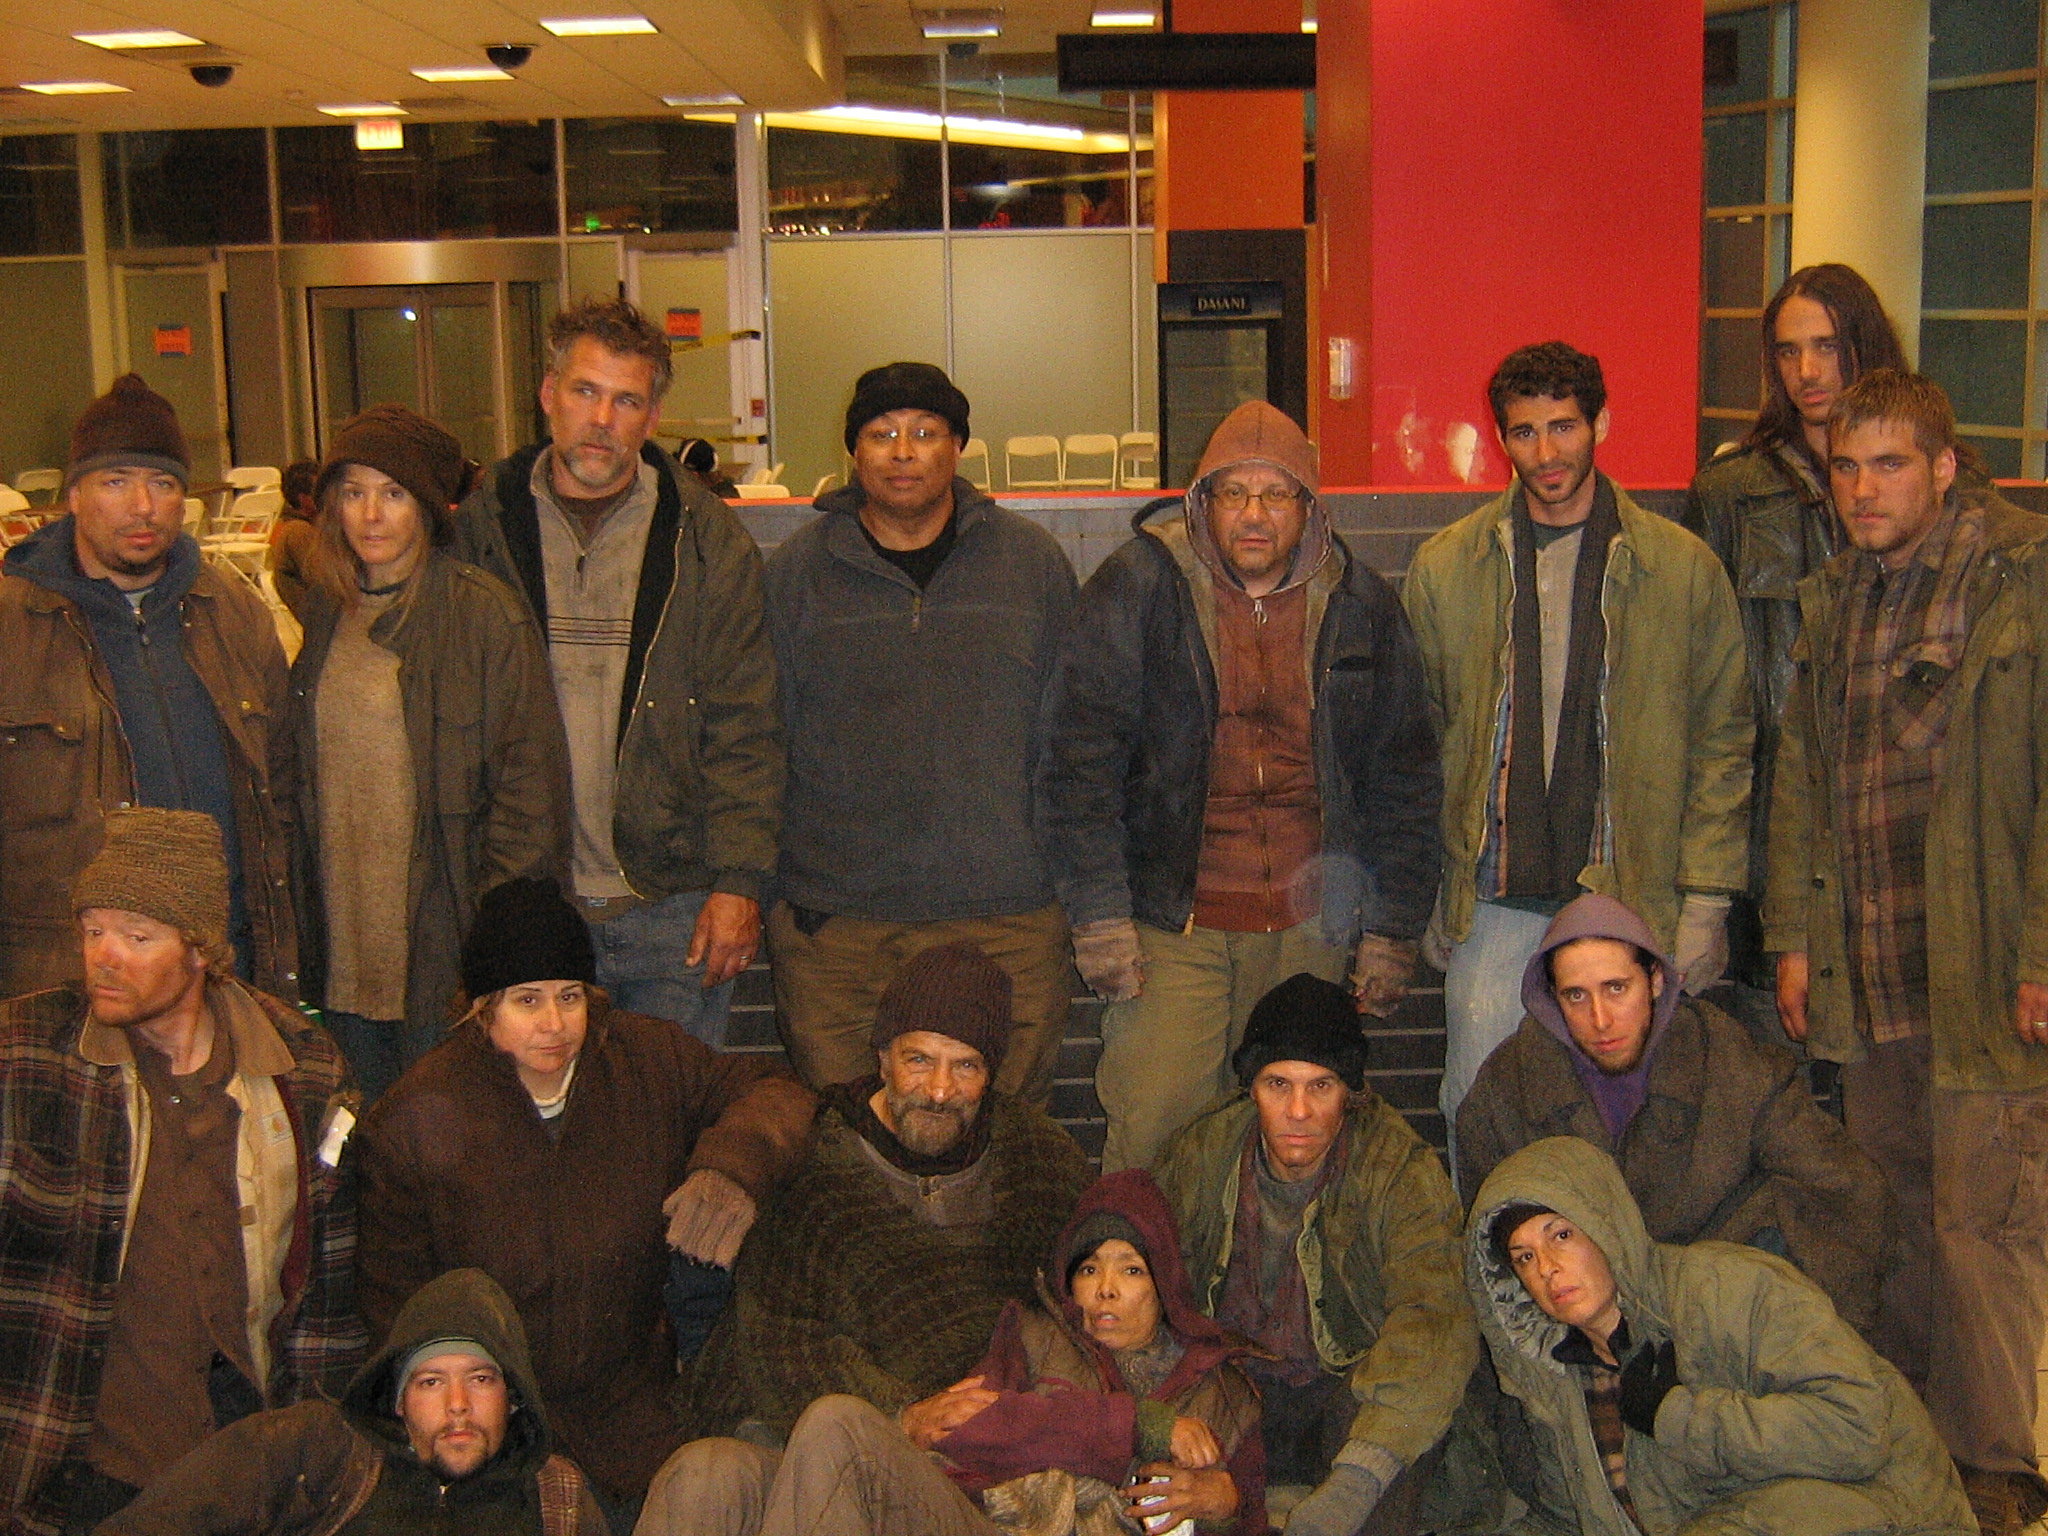 (front & center) One of the homeless mob from Red Dawn